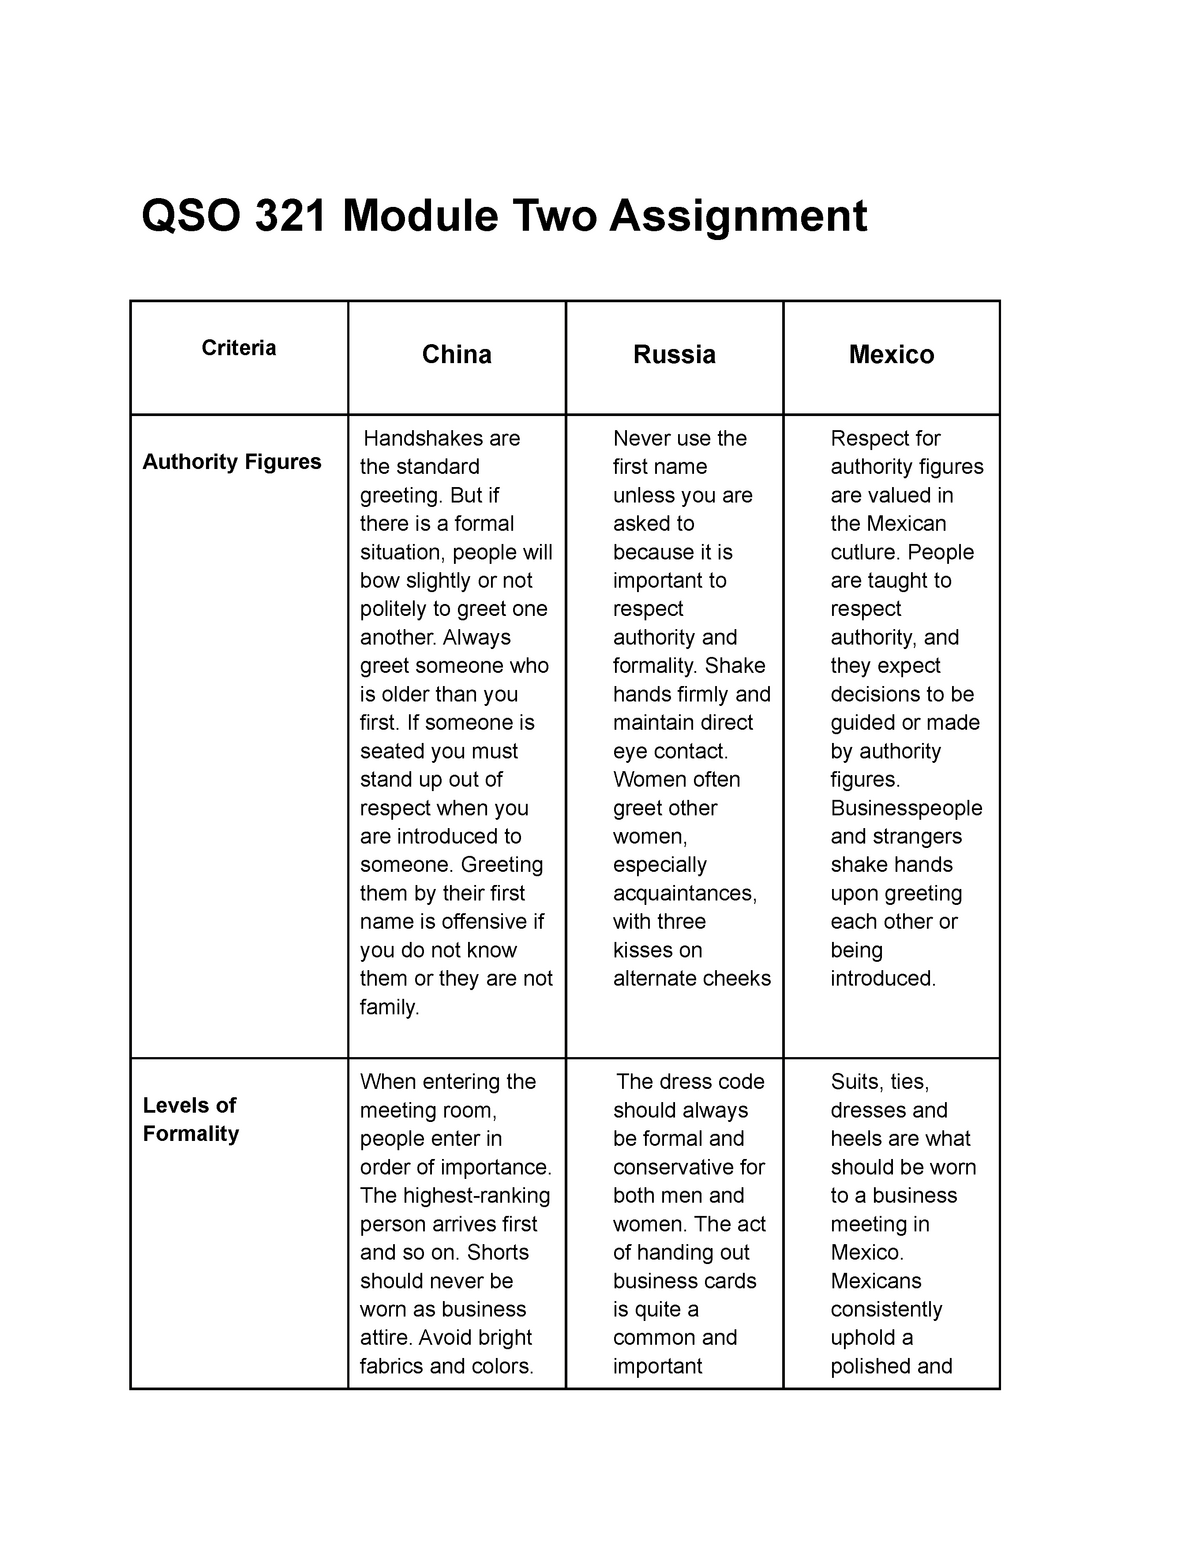 module two assignment guidelines and rubric